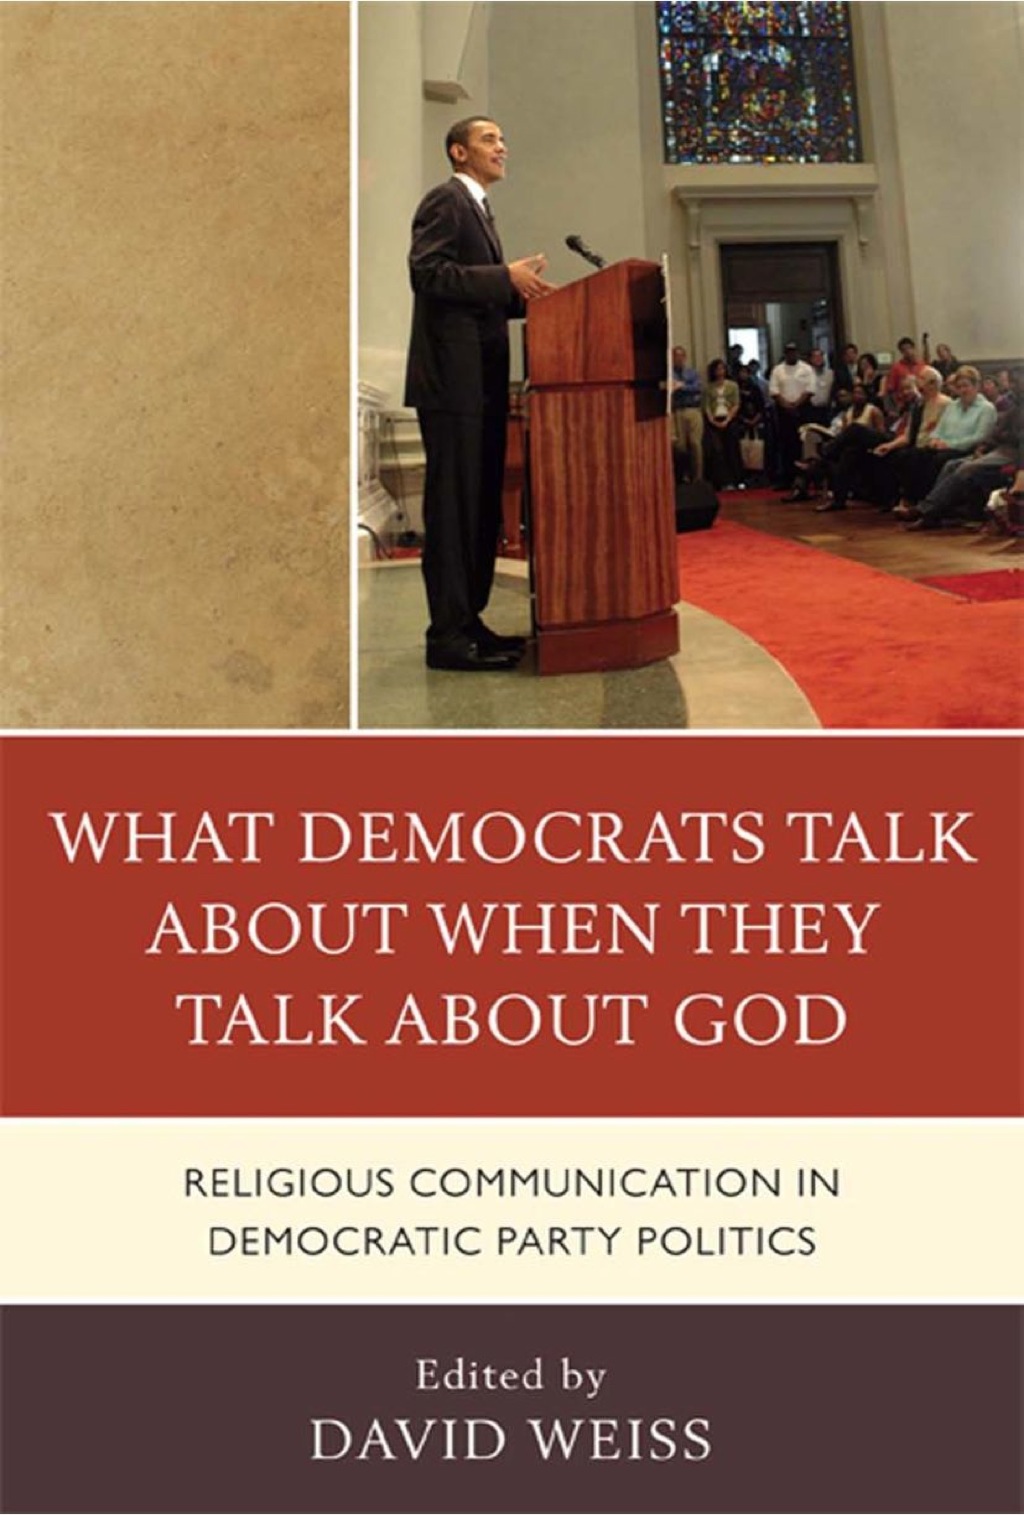 What Democrats Talk about When They Talk about God (eBook Rental) - Weiss; Ainsworth; Boerboom; Gross; Haridakis; Knopf; Langsdorf; Mehltretter; Morrow; Petre; Pier;...,